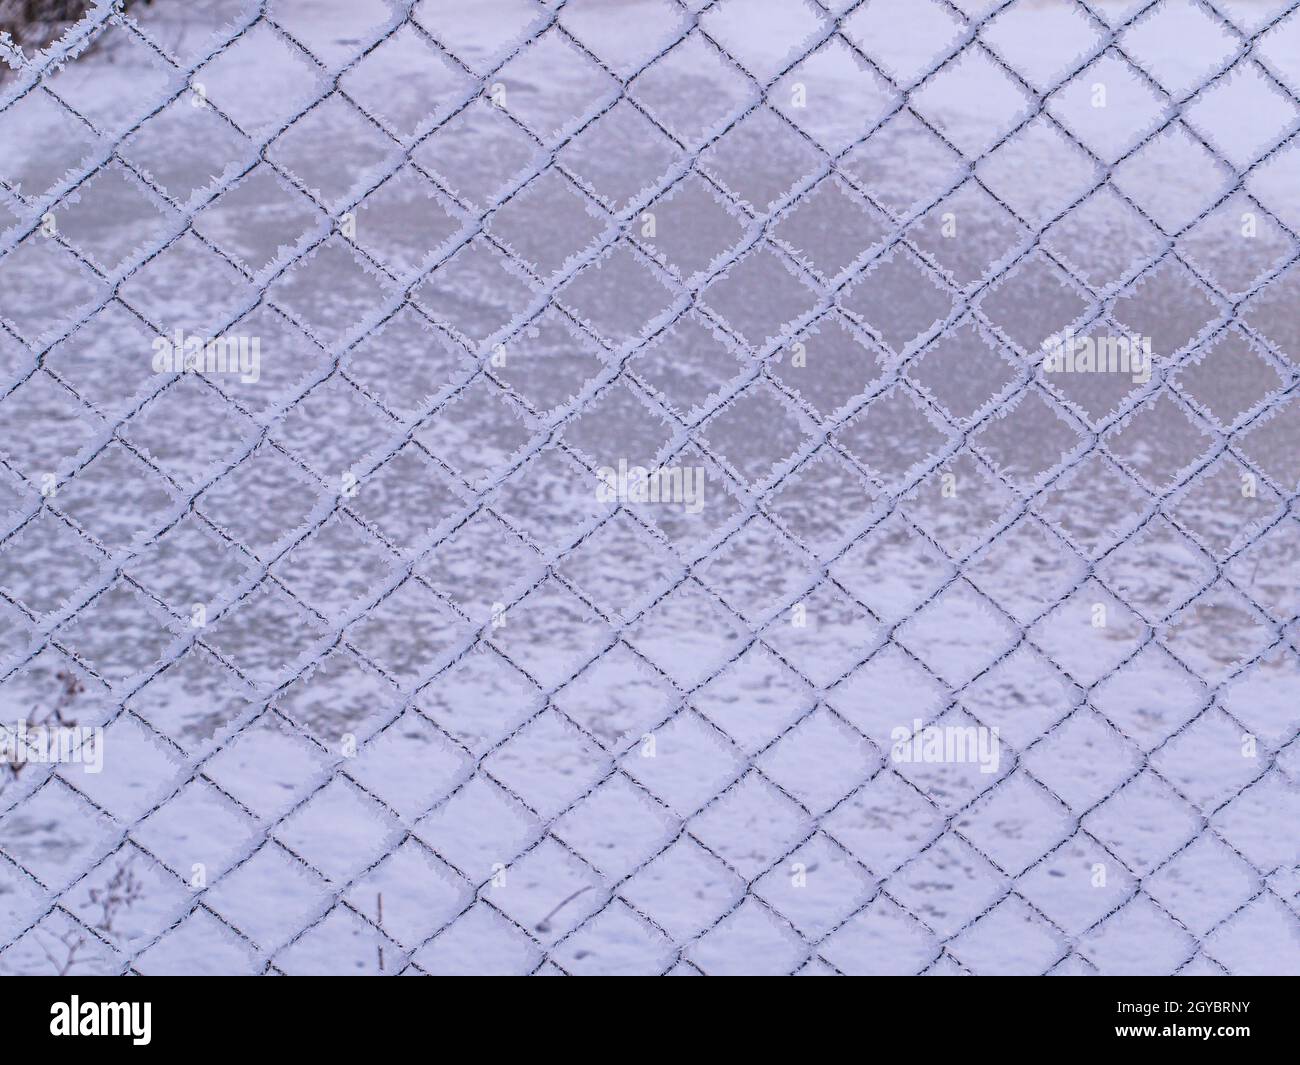 Metal mesh in white frosty frost in winter. Fence mesh. White snow. Frosty frost. Winter season. Mesh iron fence. Security systems. Private territory. Stock Photo